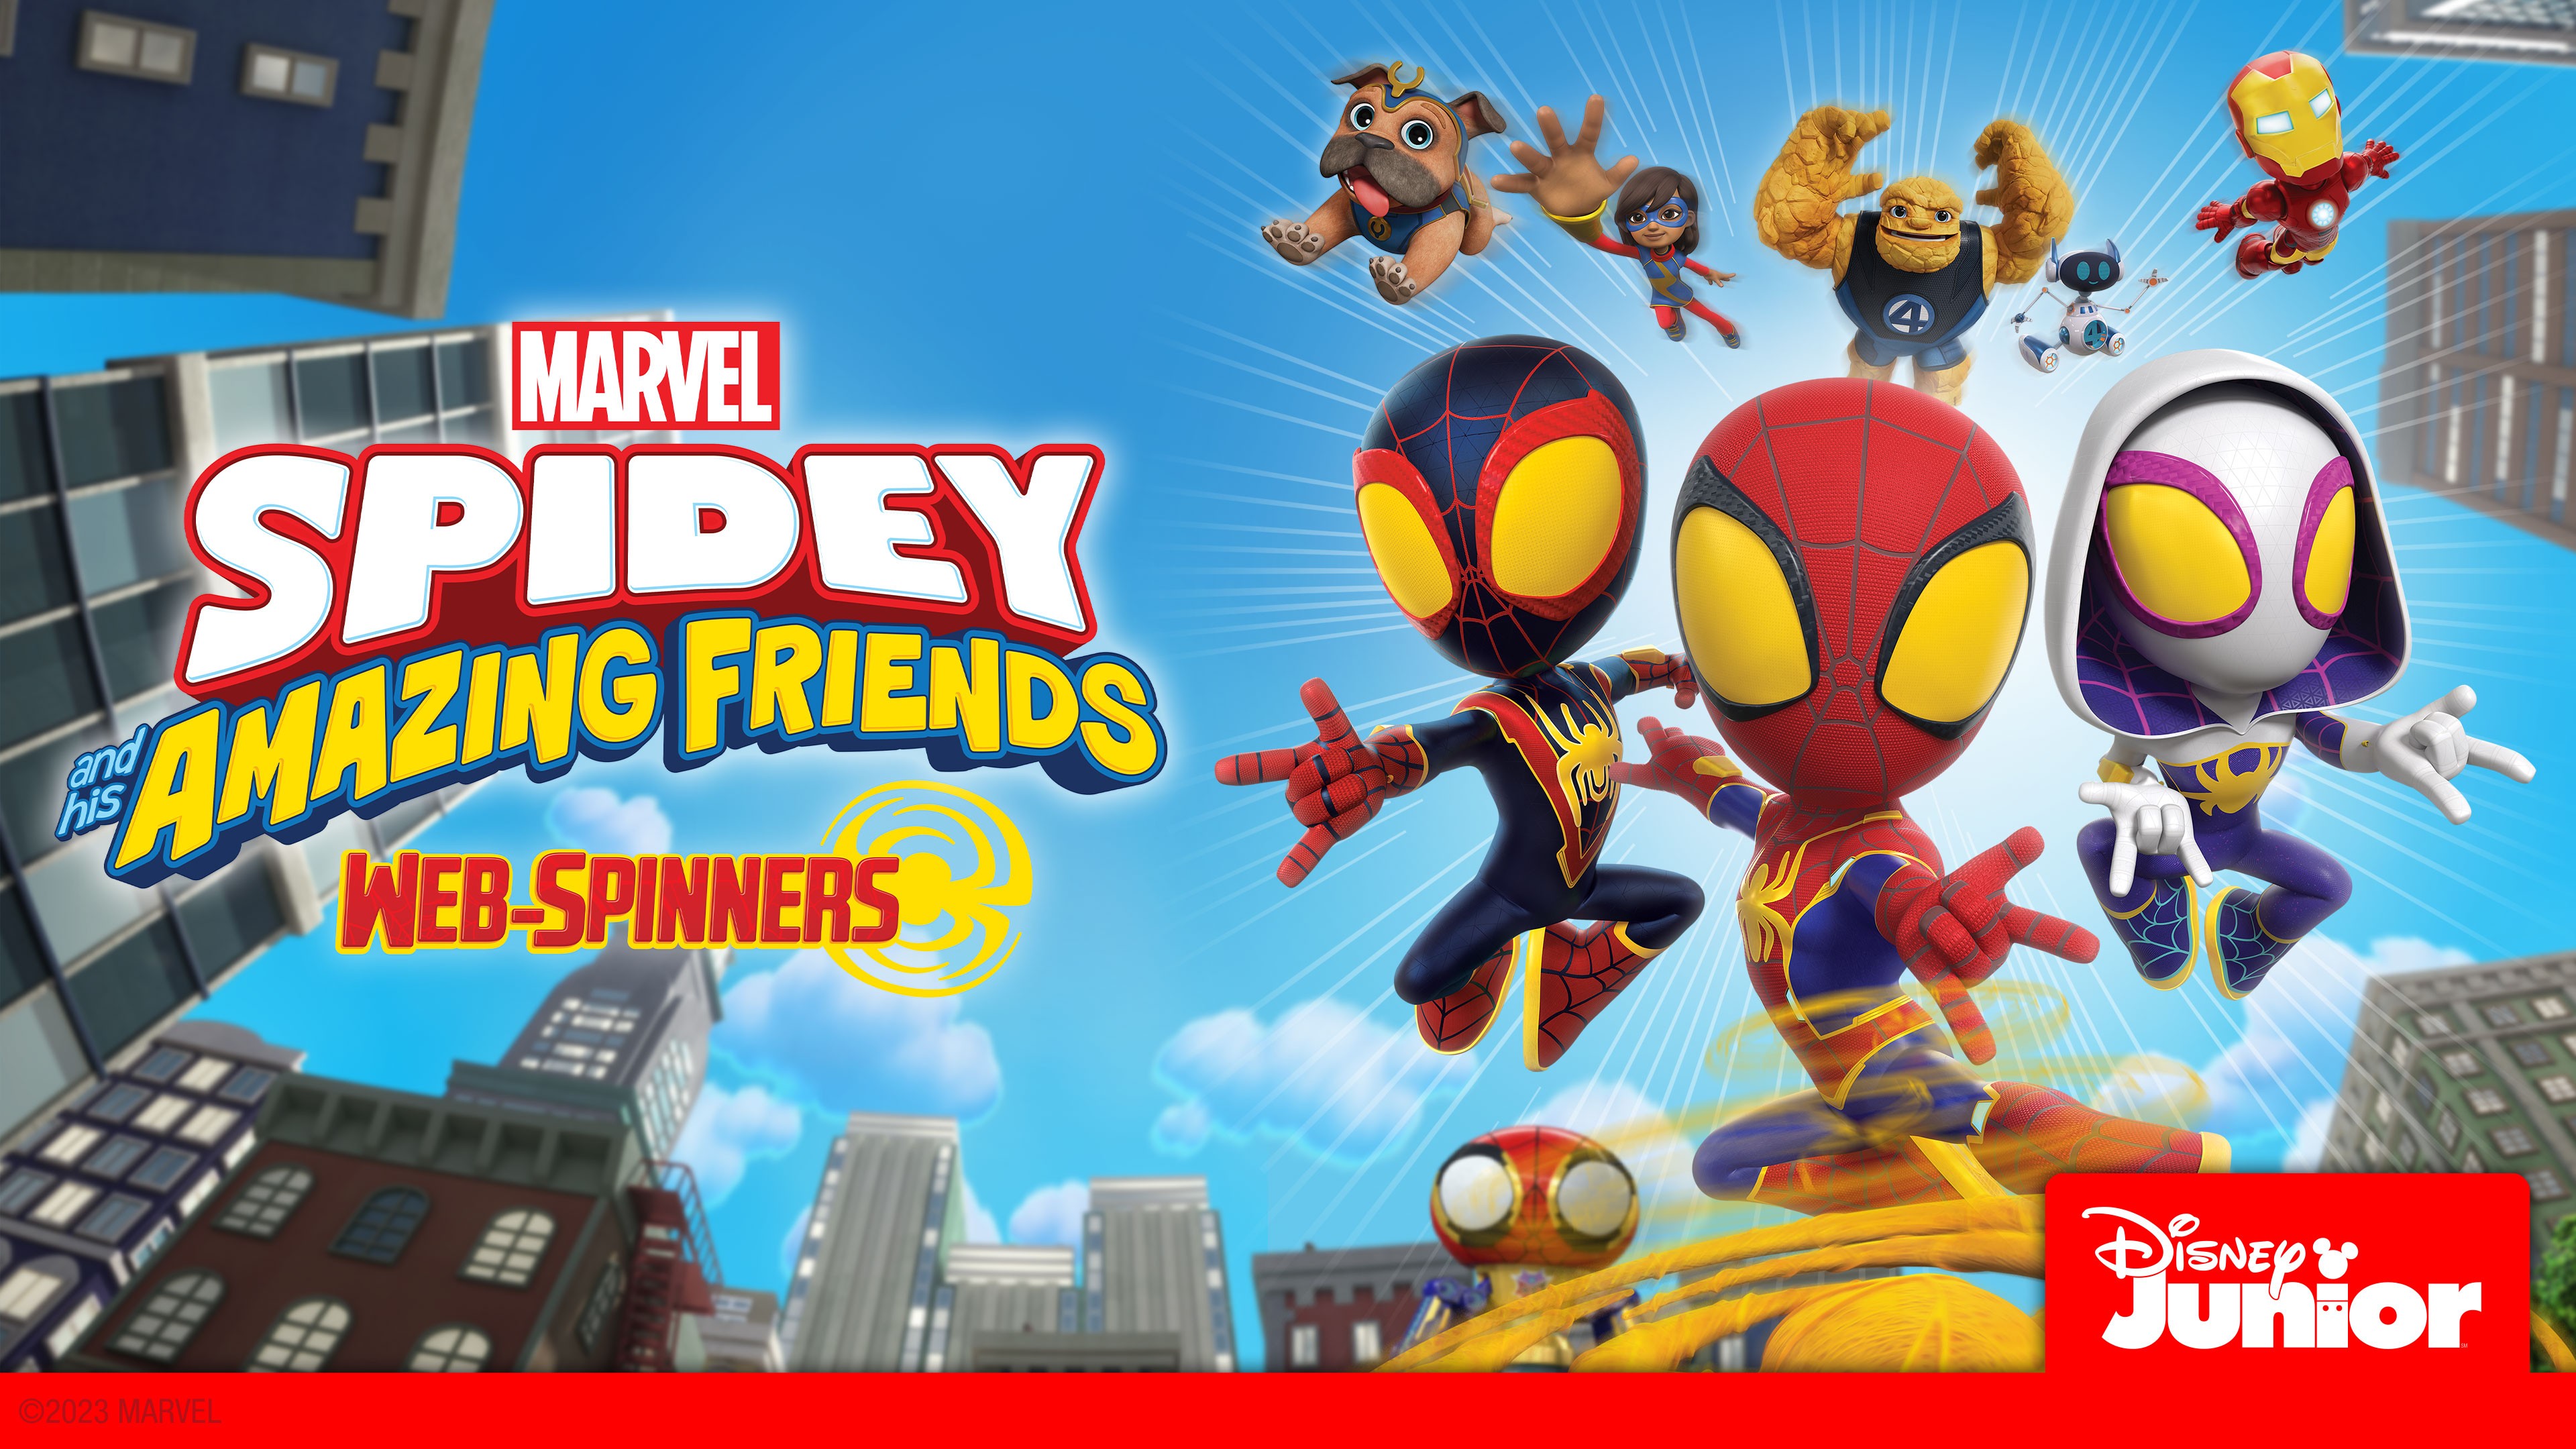 Spidey and His Amazing Friends Sets Season 3 Premiere Date